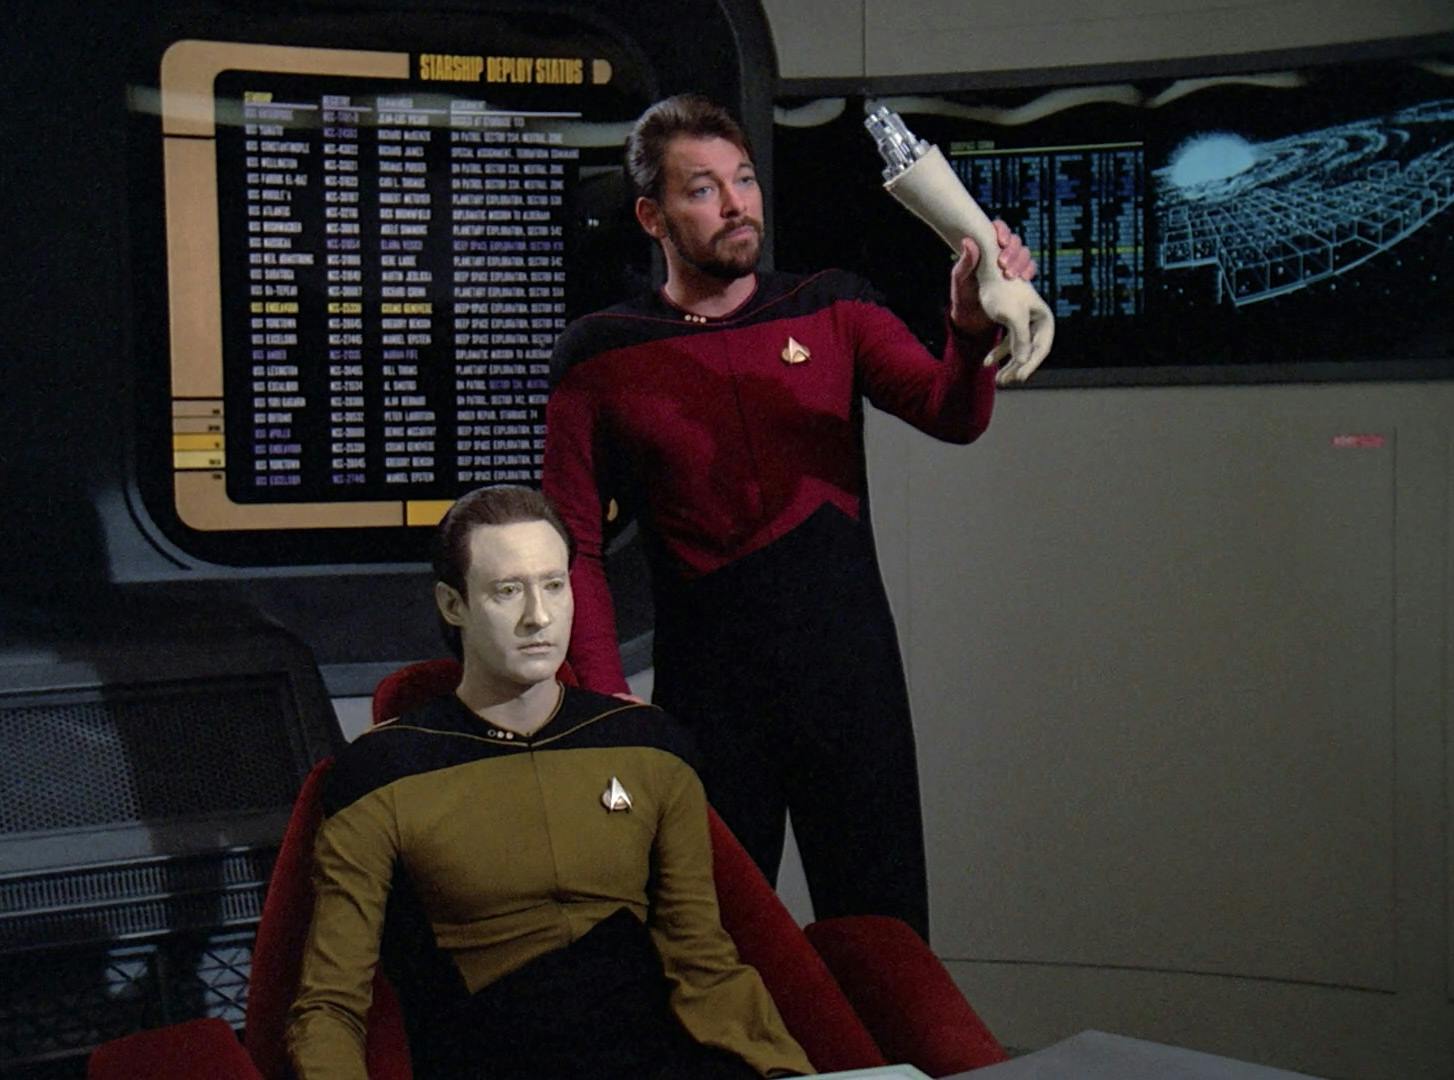 At the hearing, Riker lifts Data's hand to show the tribunal in 'The Measure of a Man'